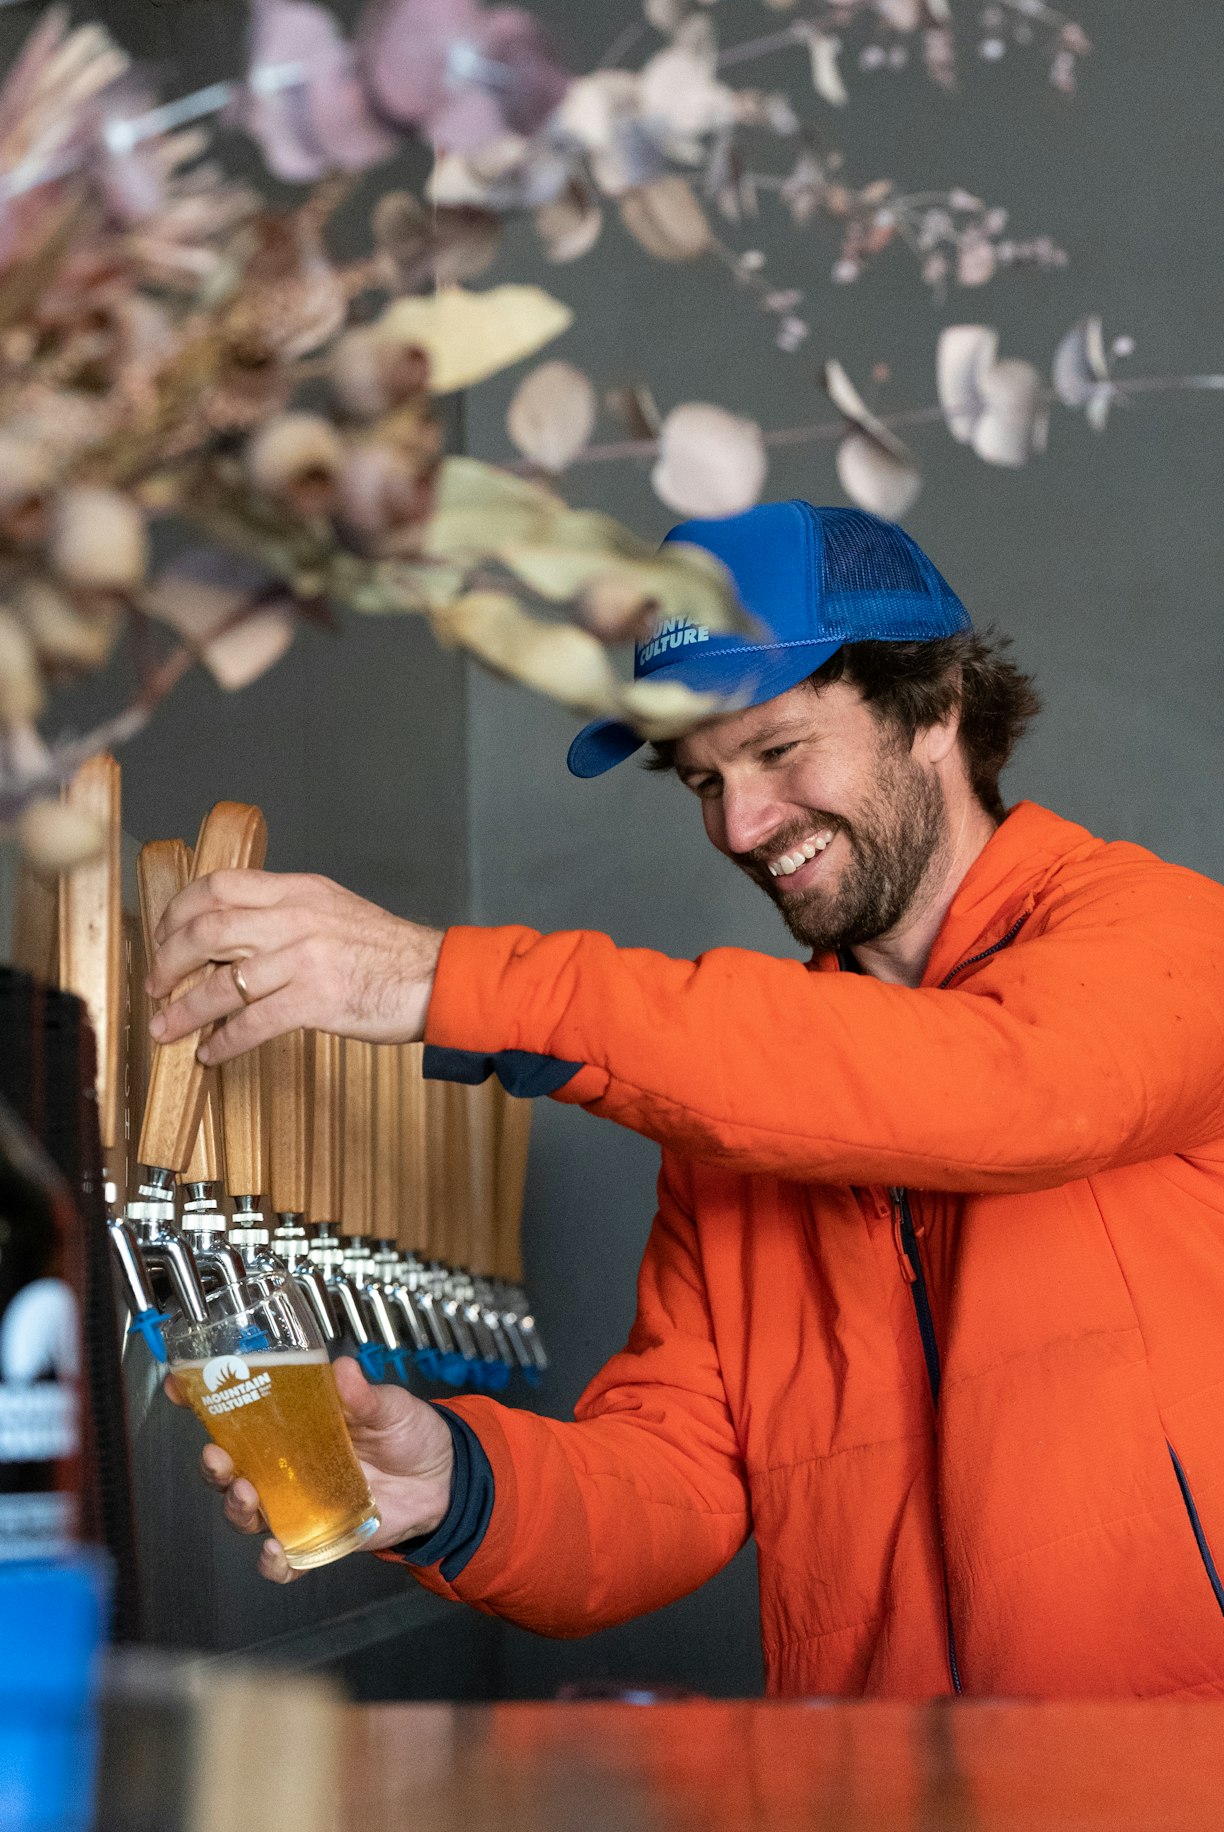 DJ, Mountain Culture's co-founder & head brewer